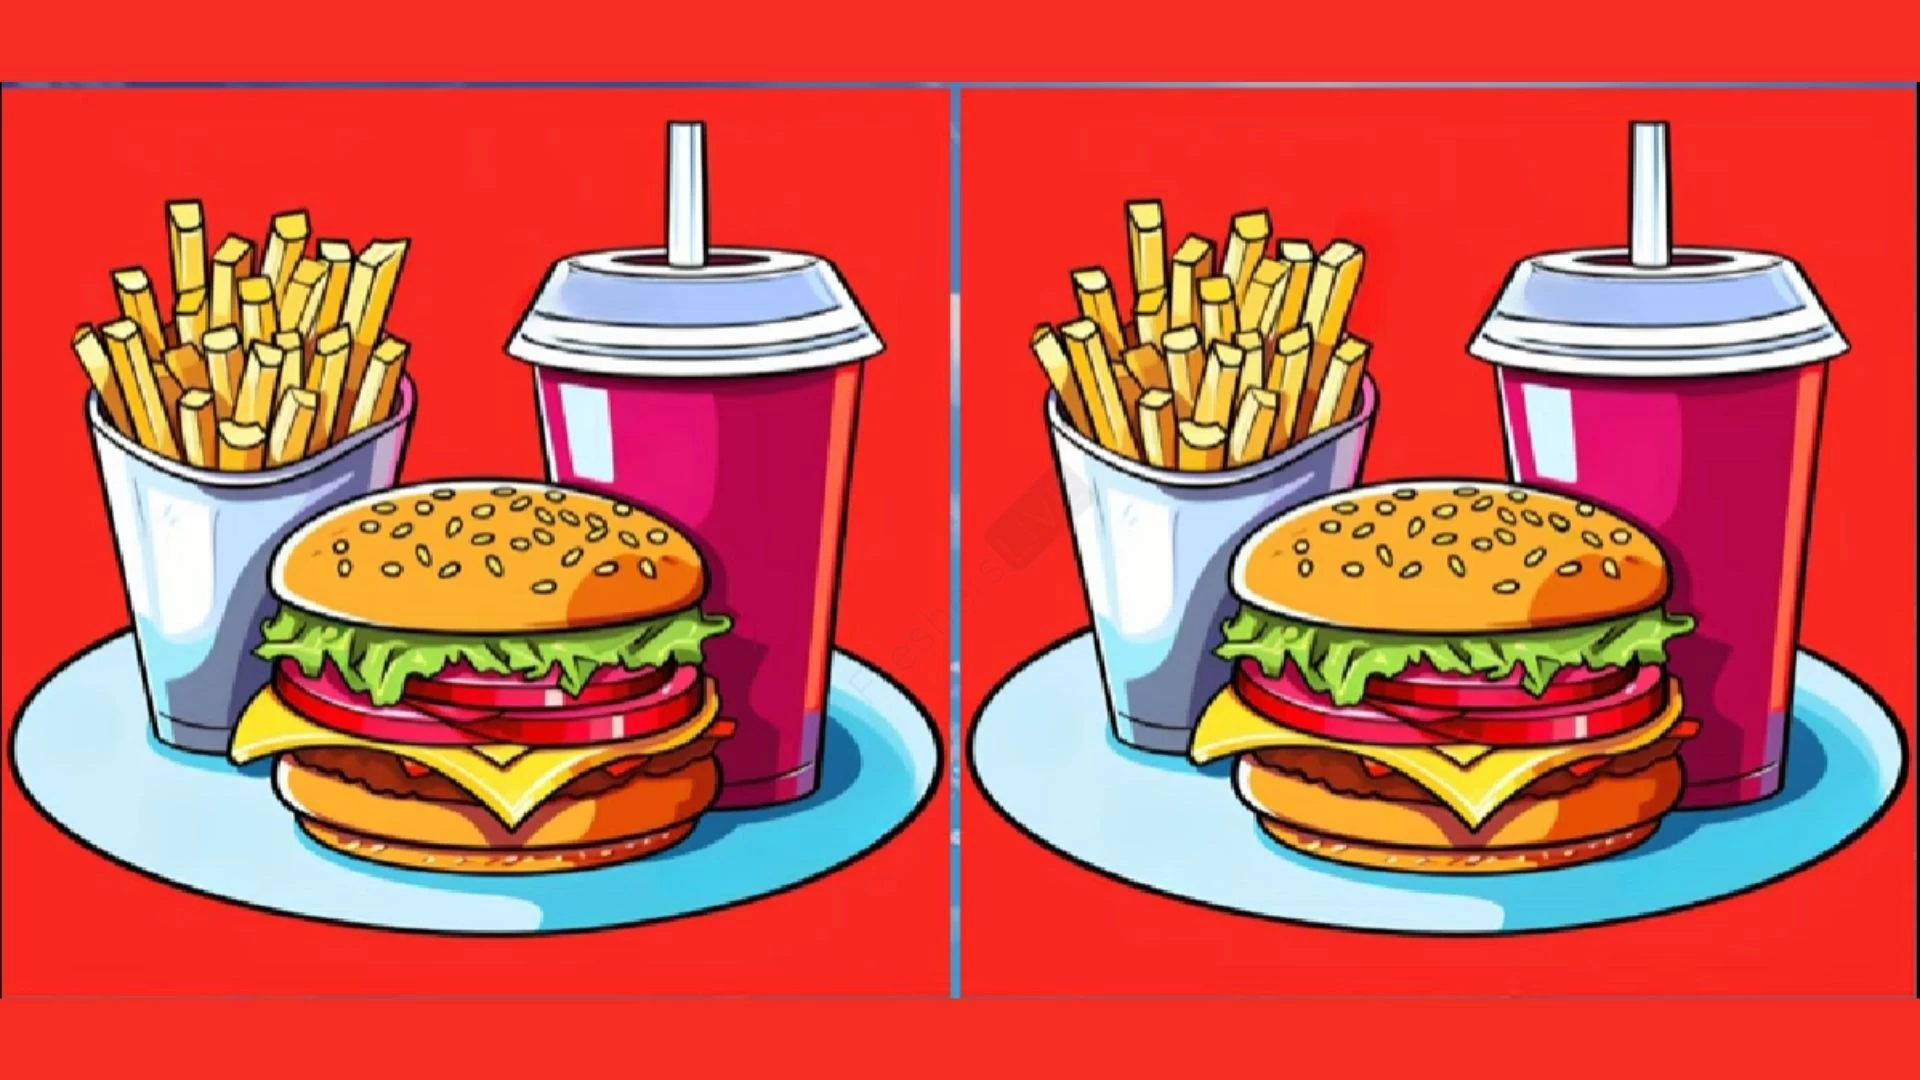 Only the most observant can spot 3 differences between the Burger Meal pictures in 20 seconds.